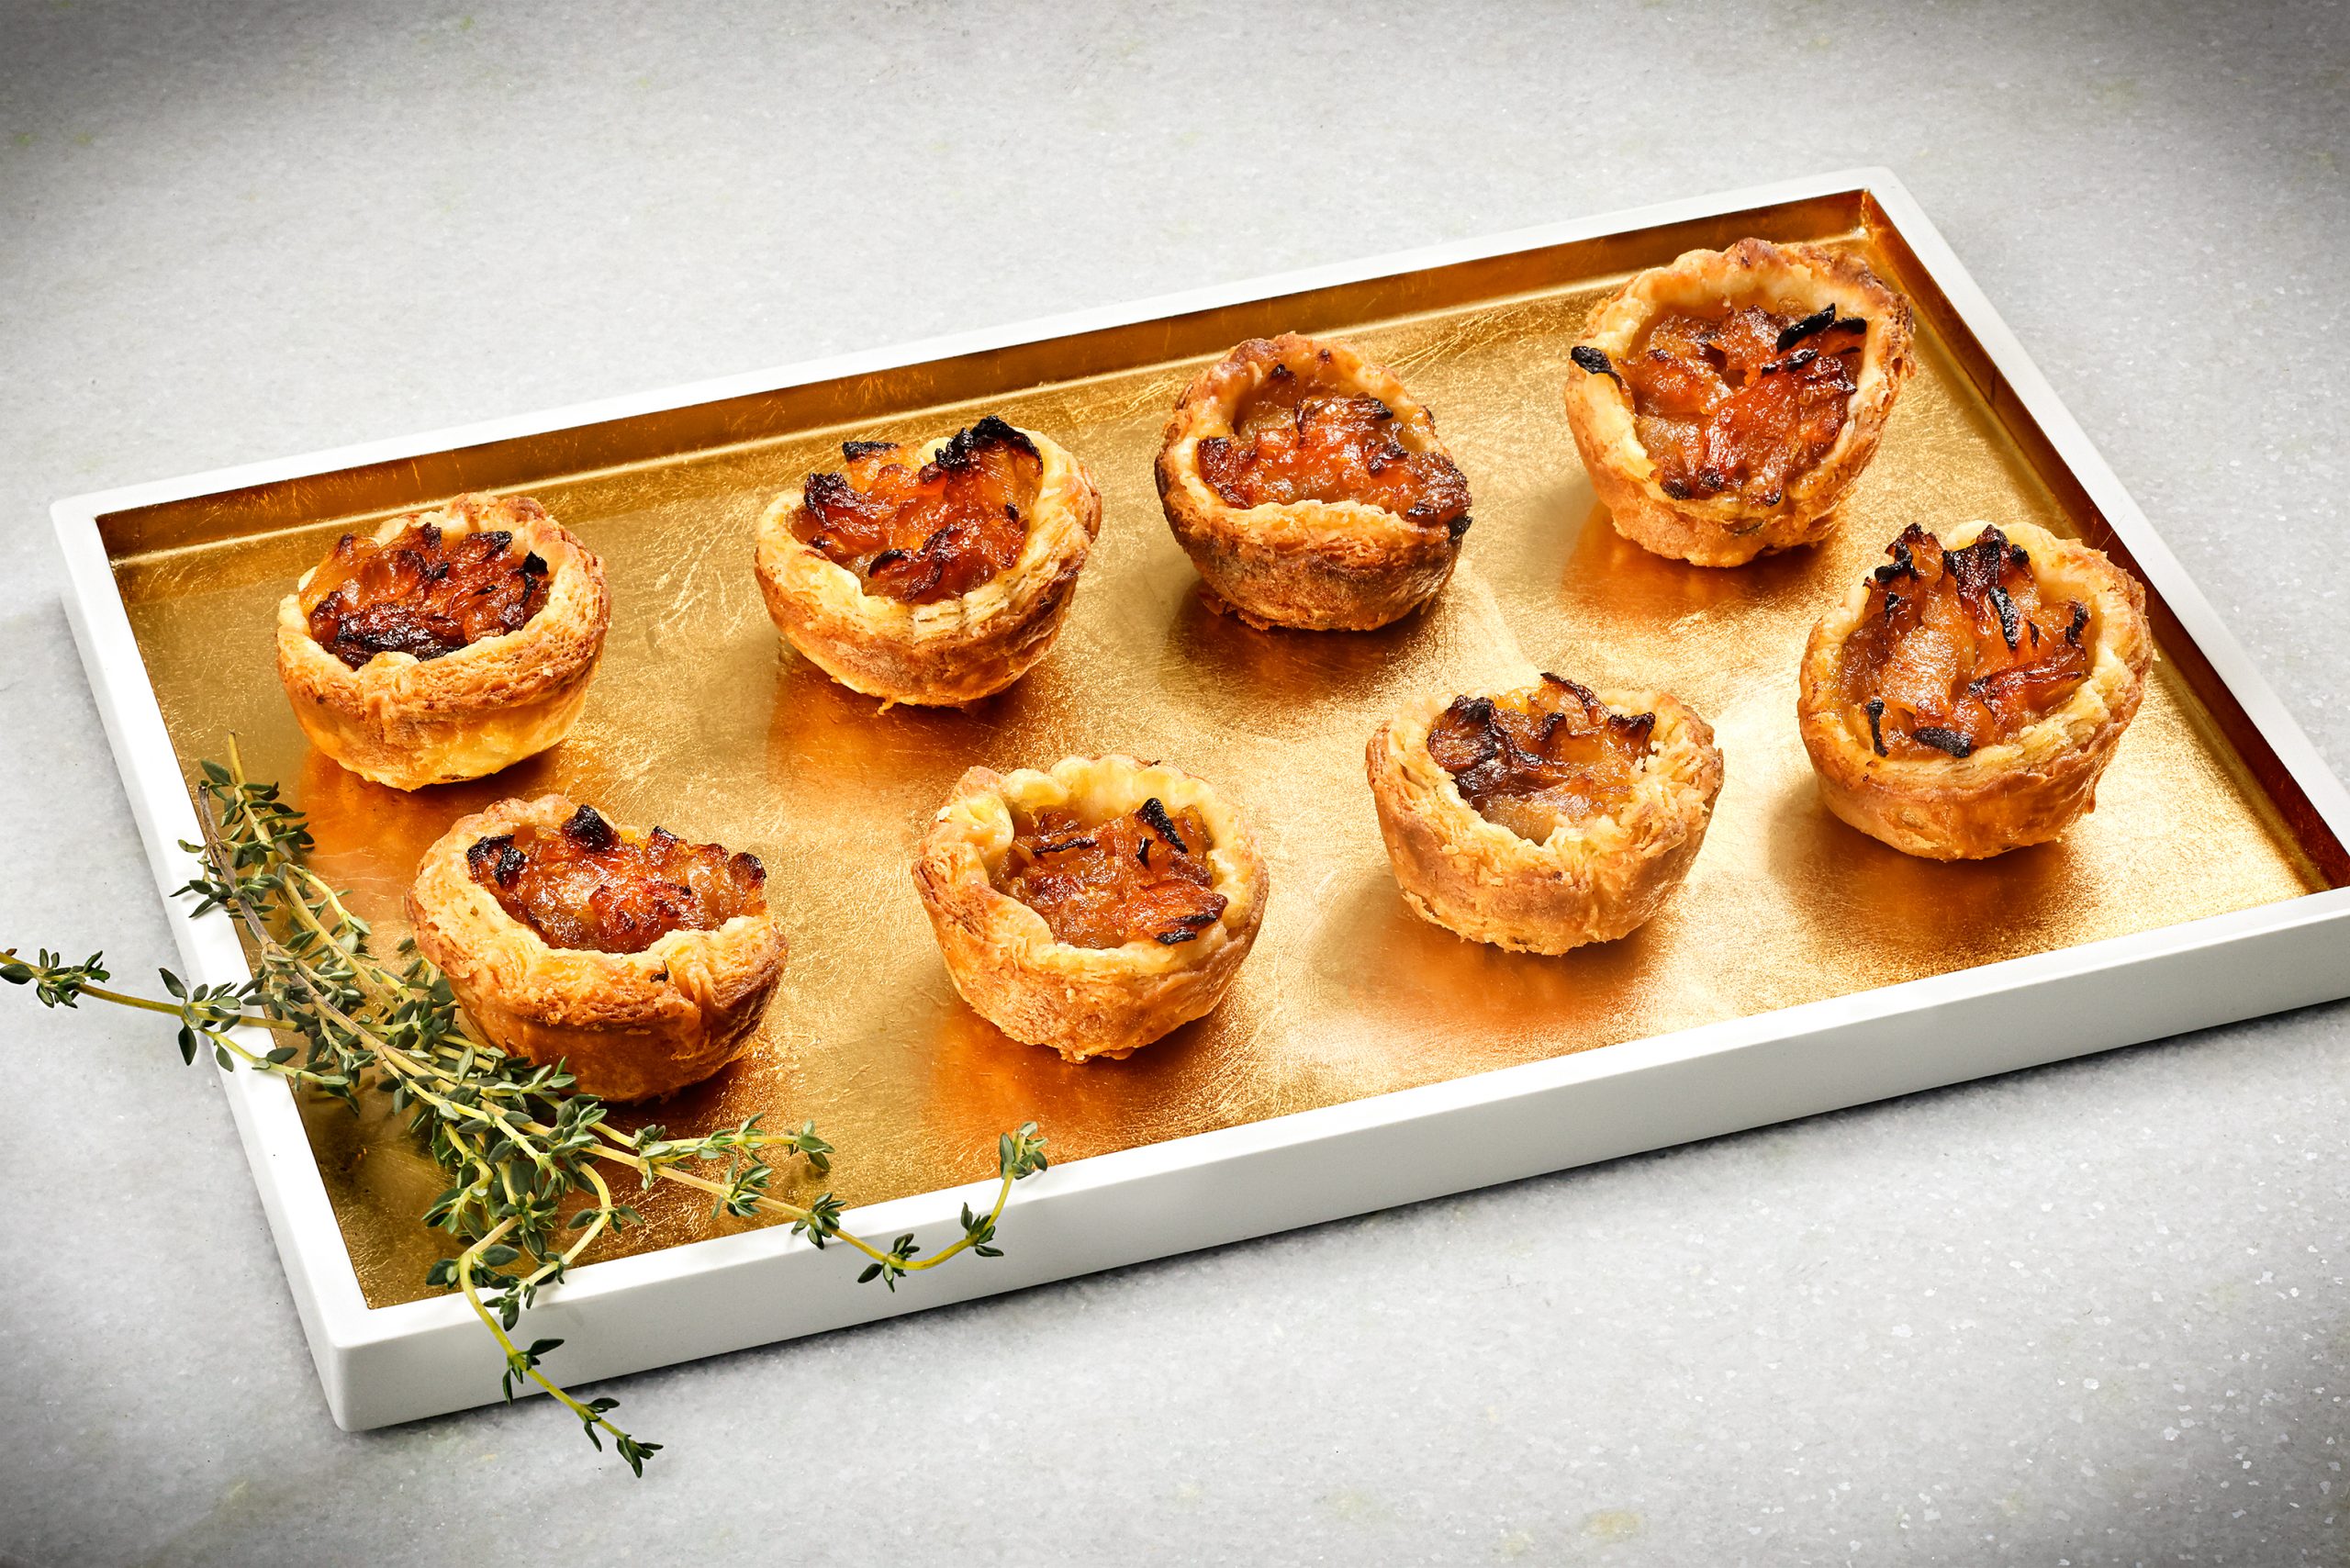 Simple flavors shine in Caramelized Onion Tartlet appetizers. You can make a larger tart with the same ingredients and serve it as a side dish or vegetarian main. Serve warm or at room temperature. Mouthwatering! Cream and gold tray courtesy of Cottage & Vine.